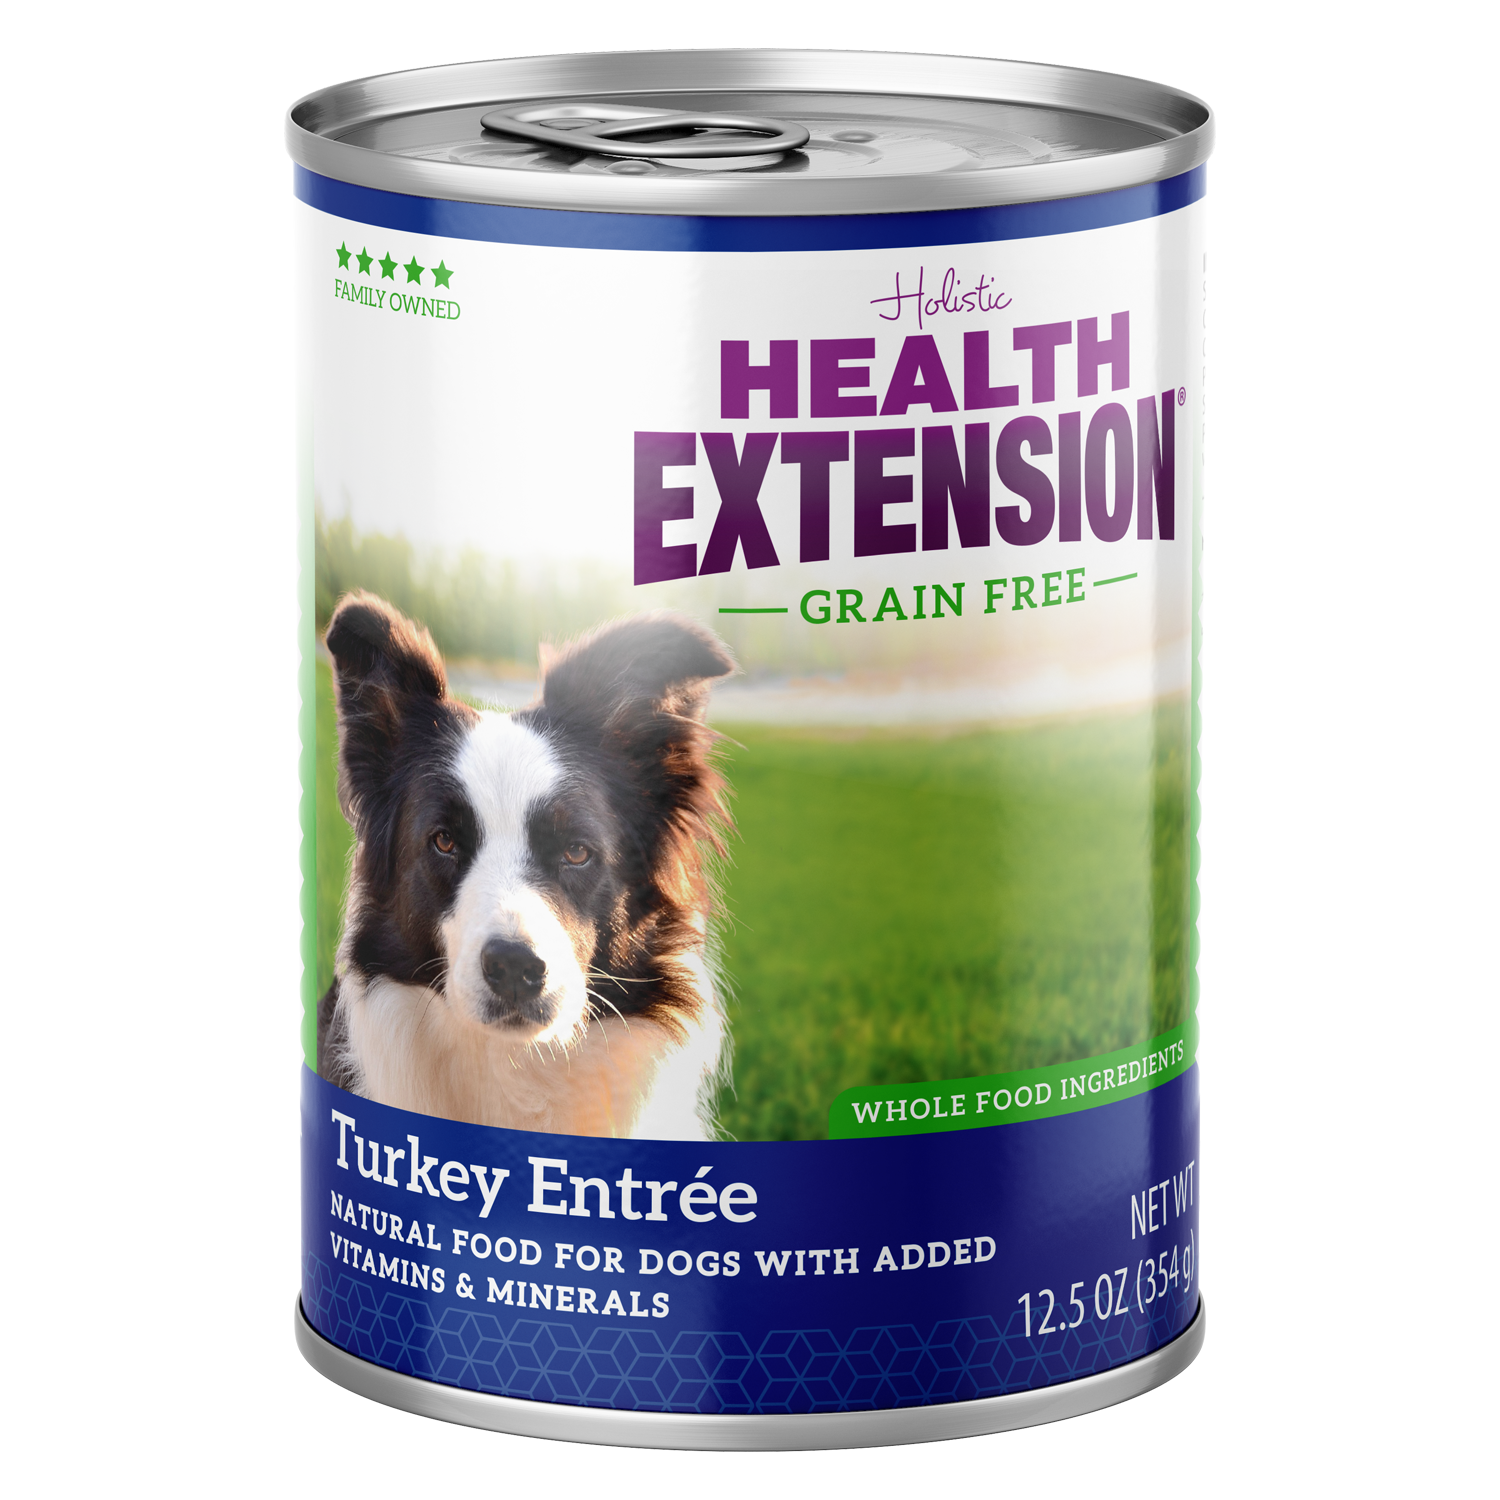 A can of Health Extension Grain Free Turkey Entrée dog food, featuring a photo of a black and white Border Collie. 